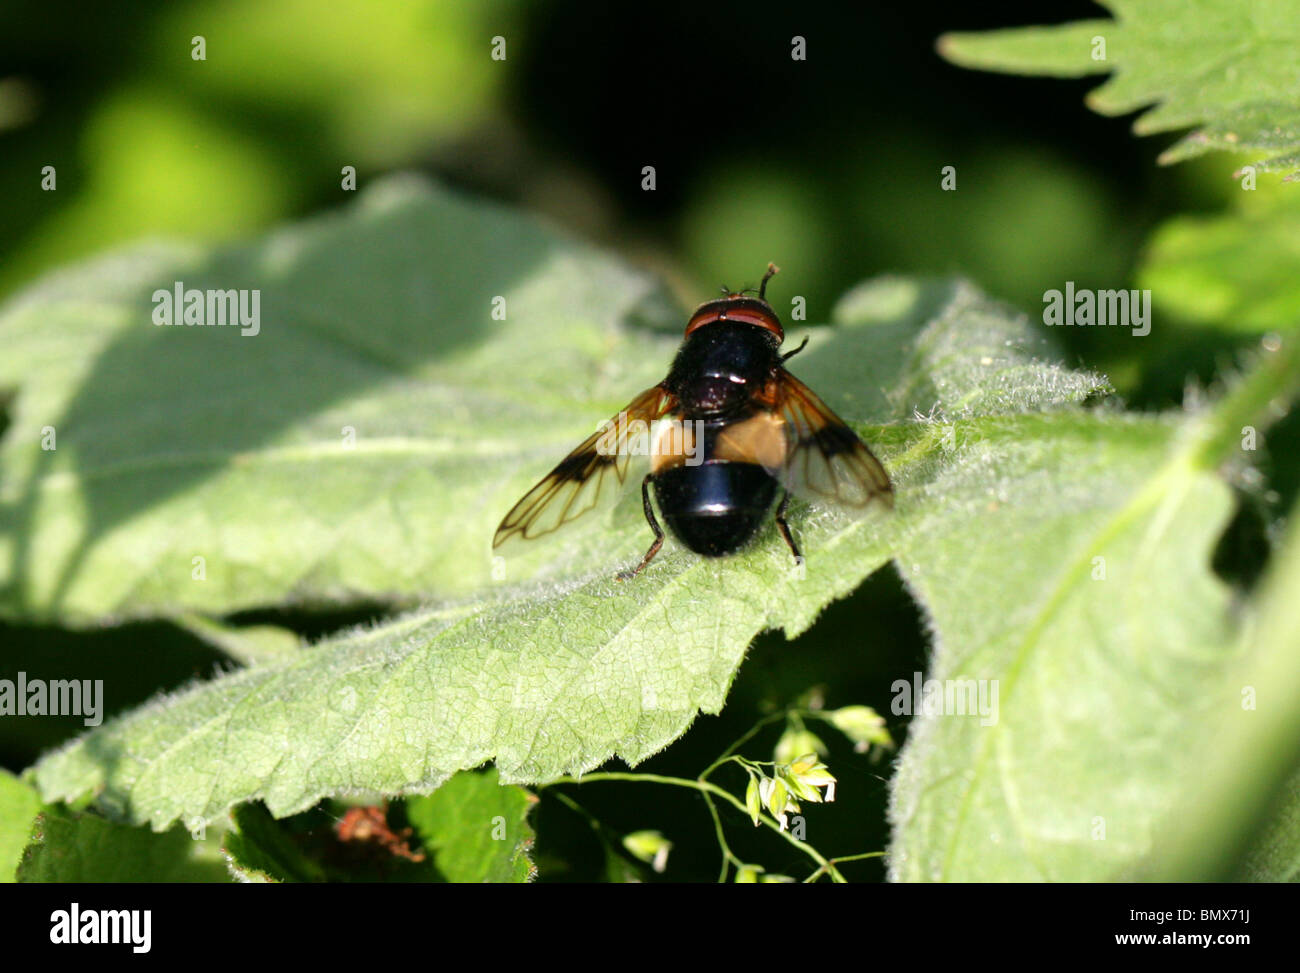 Pellucid Hoverfly, Volucella pellucens, Syrphidae, Diptera, Male, UK. Aka White Belted Plume Horn Hover-fly. Stock Photo